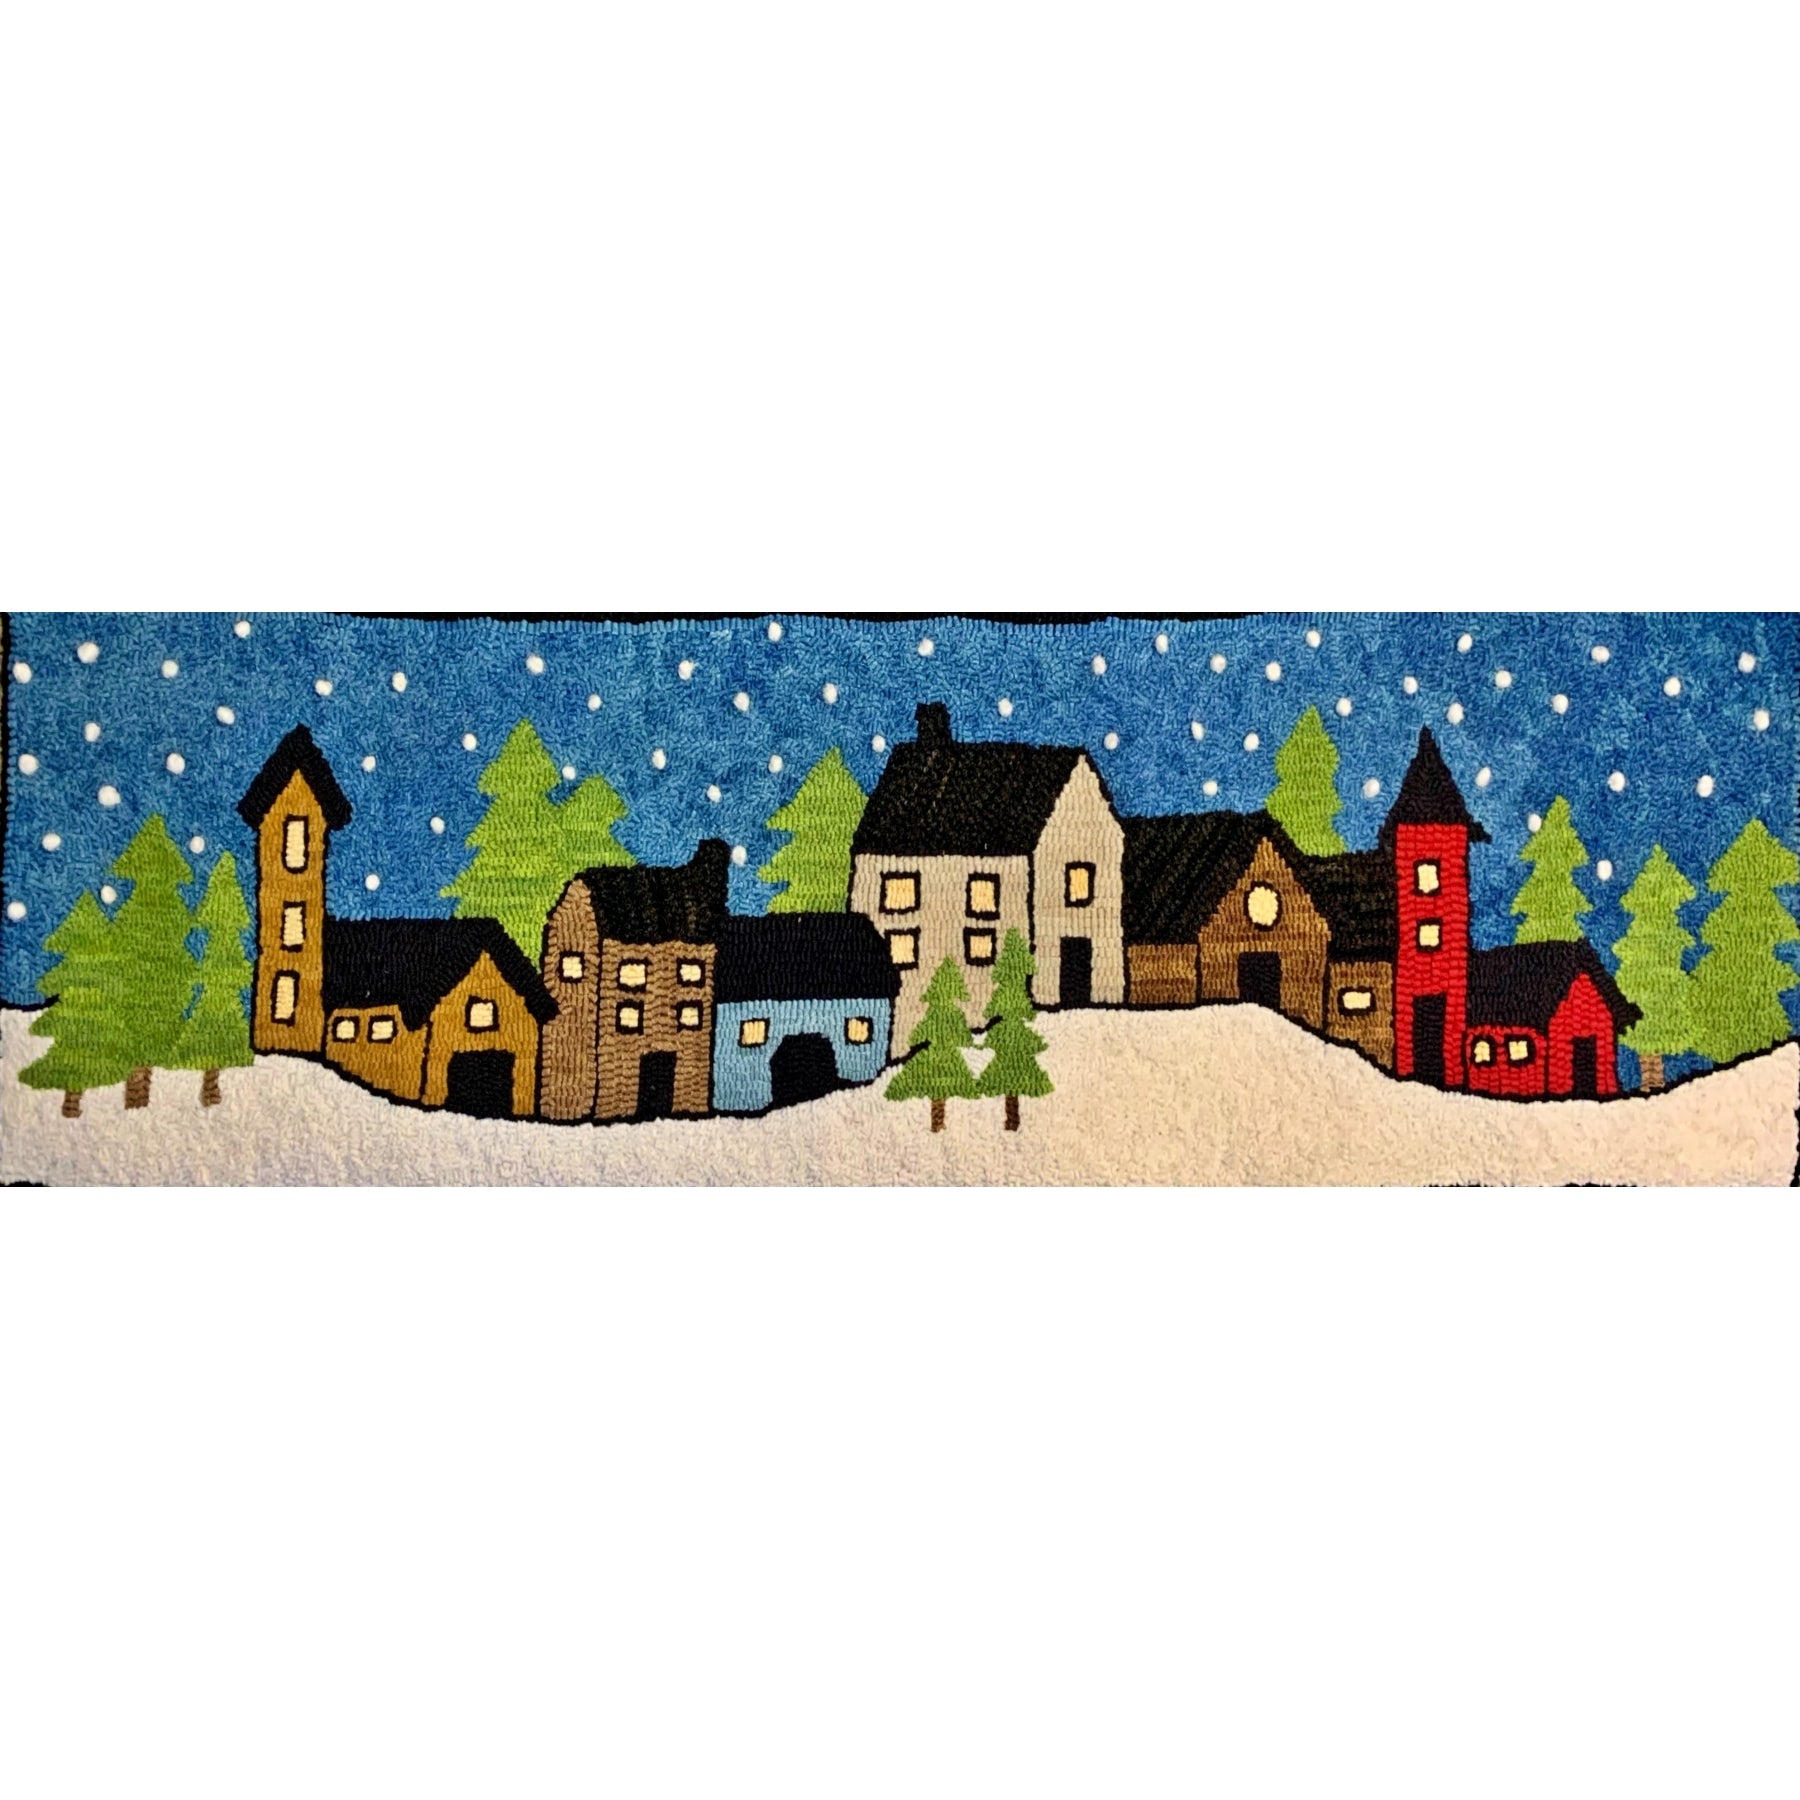 Snowy Village, rug hooked by Kelly Parr